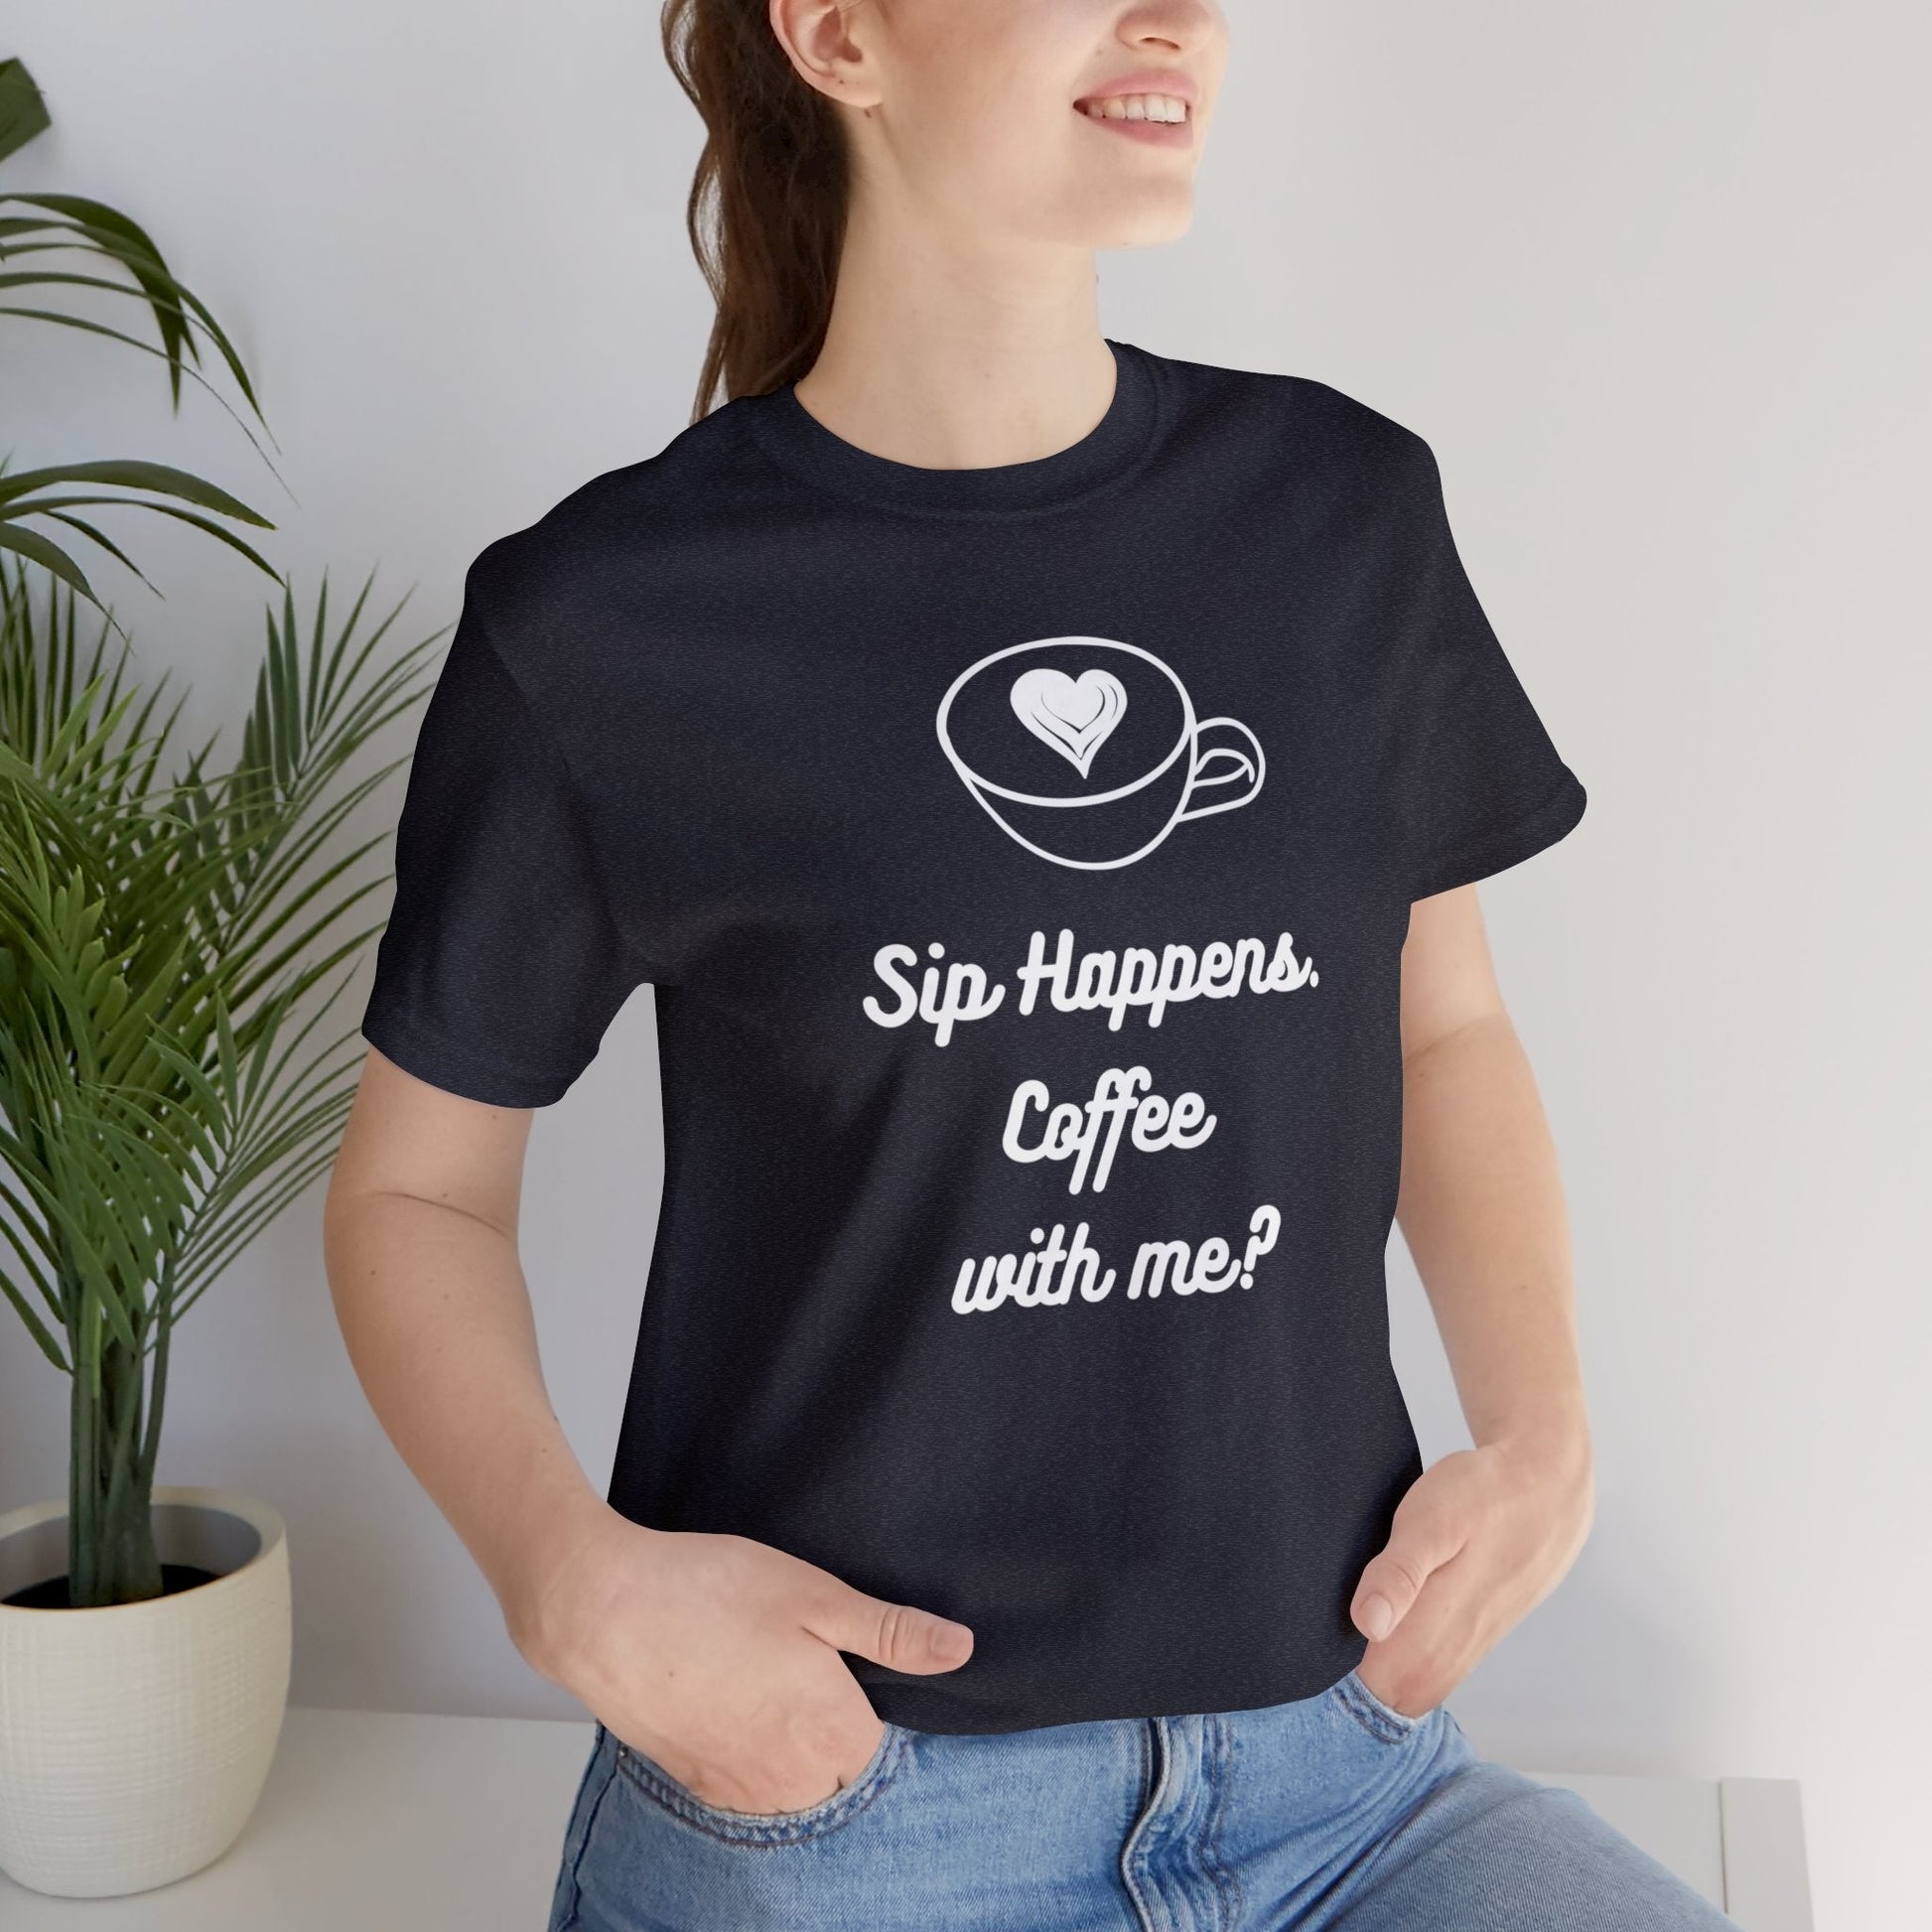 Sip Happens. Coffee with me? T-shirt. - InkArt Fashions